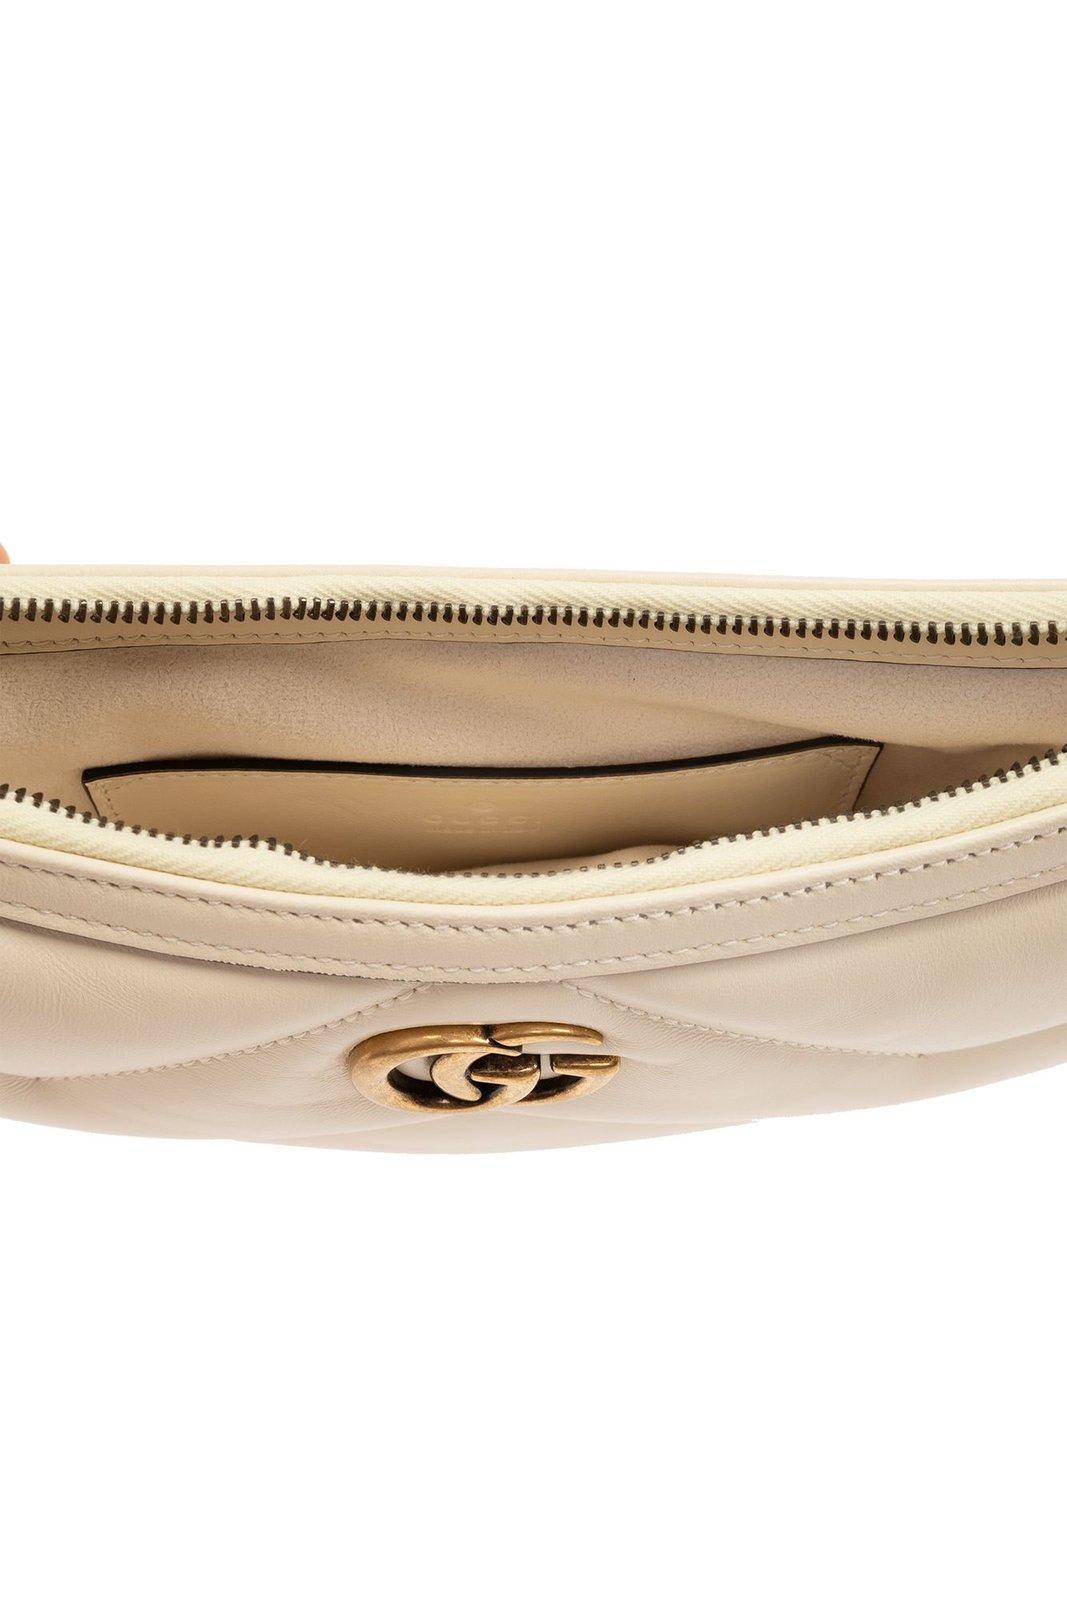 Shop Gucci Gg Marmont Small Shoulder Bag In White